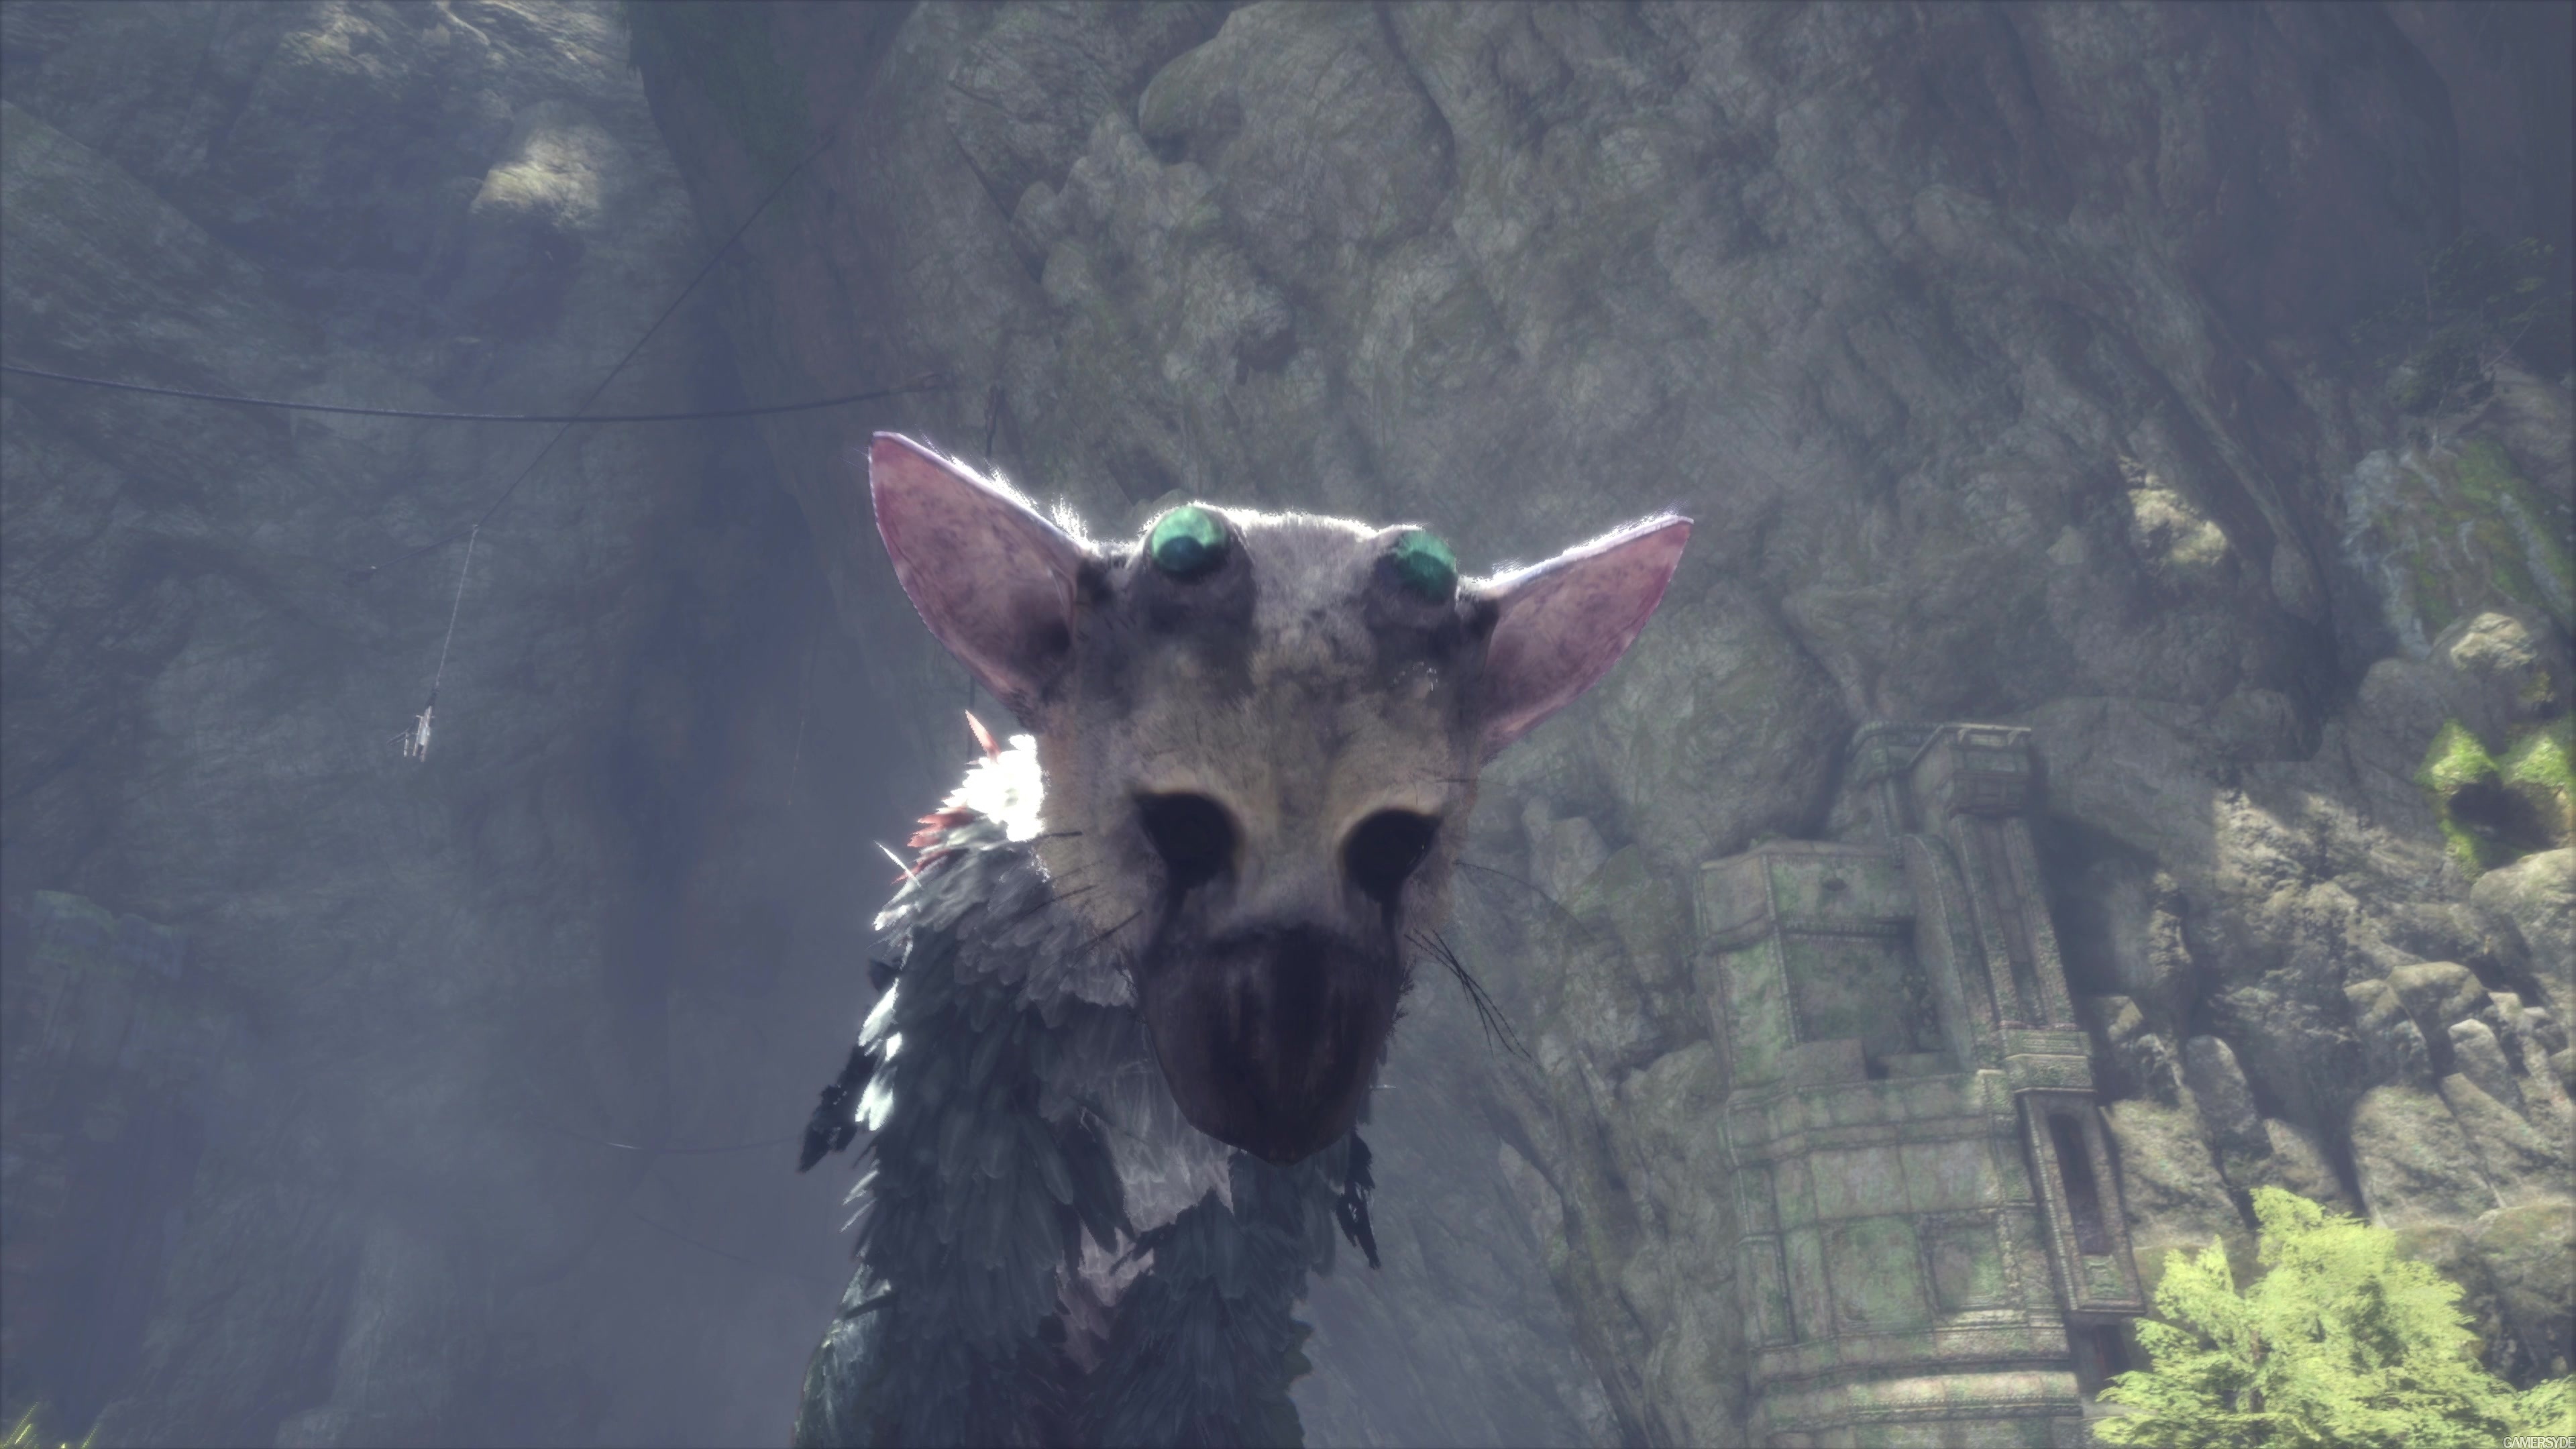 the last guardian gameplay length